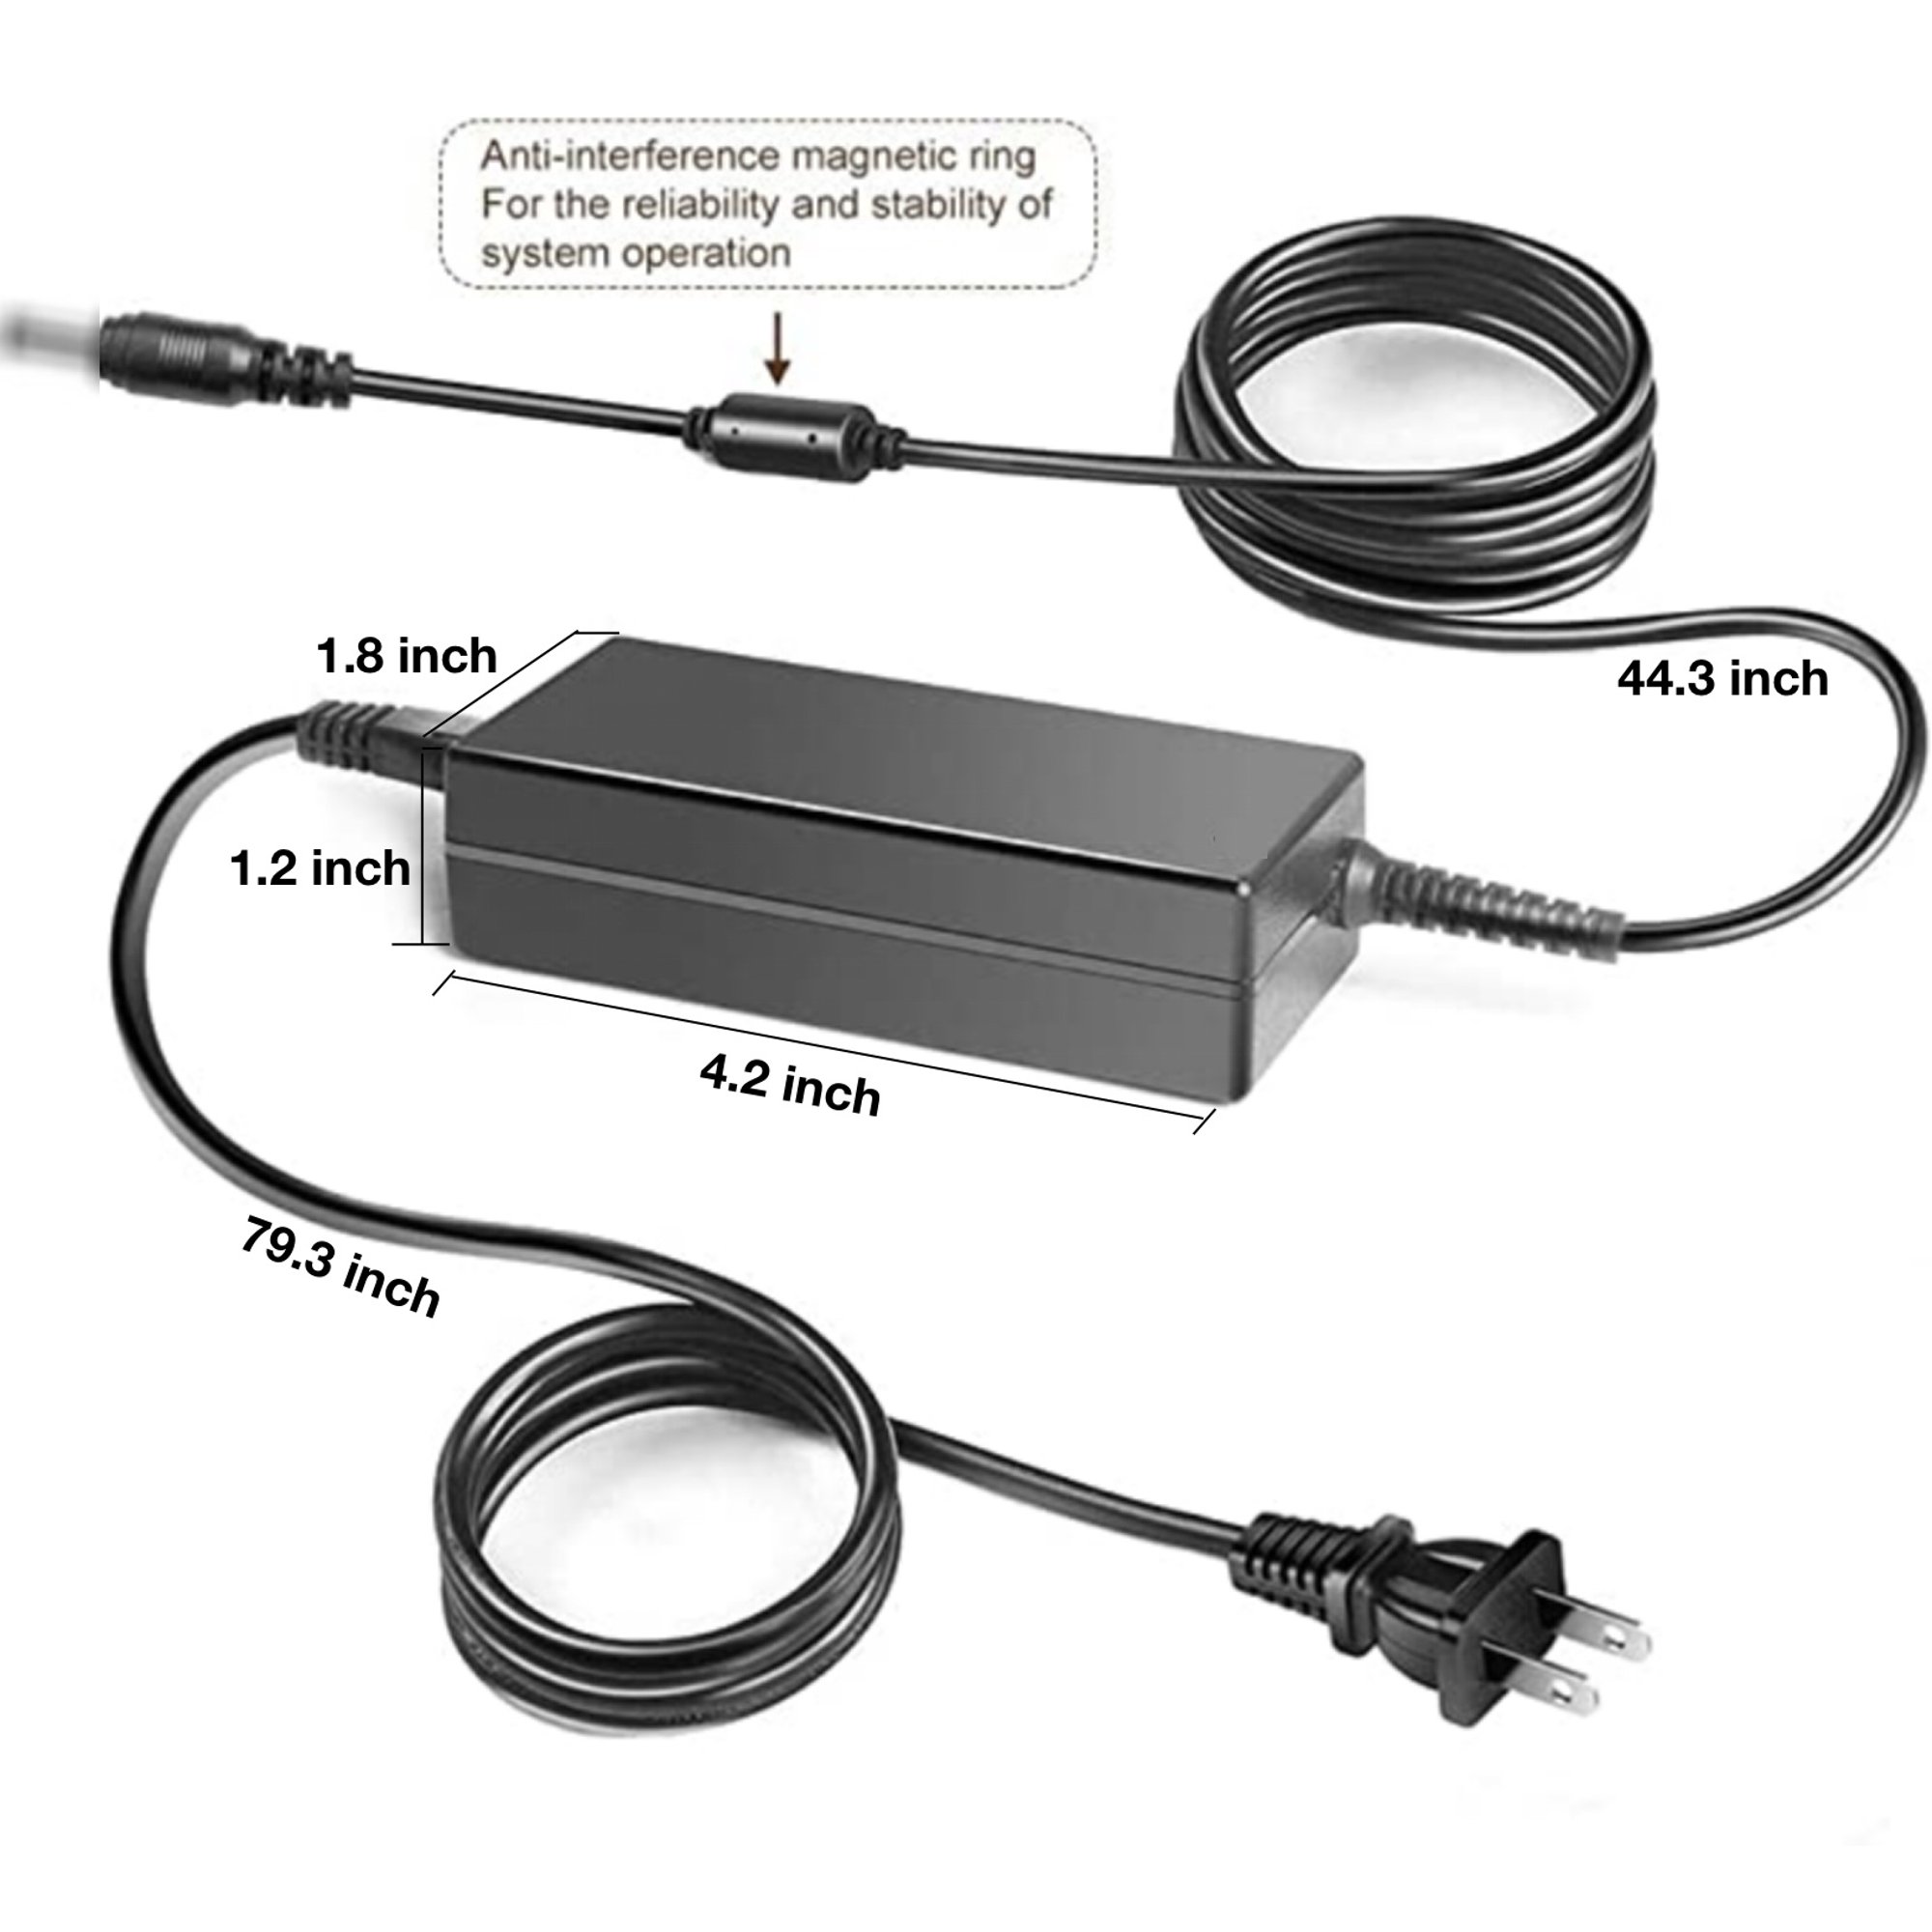 24V AC/DC Adapter for Replacement DVE DSA-90W-24 24090 DSA-90W-241 24090  DSA-90W-24124090 DC24V 3.75A 4A 24.0V 3750mA 24VDC 90W Switching Power  Supply Cord Charger (w/Barrel Round Tip)